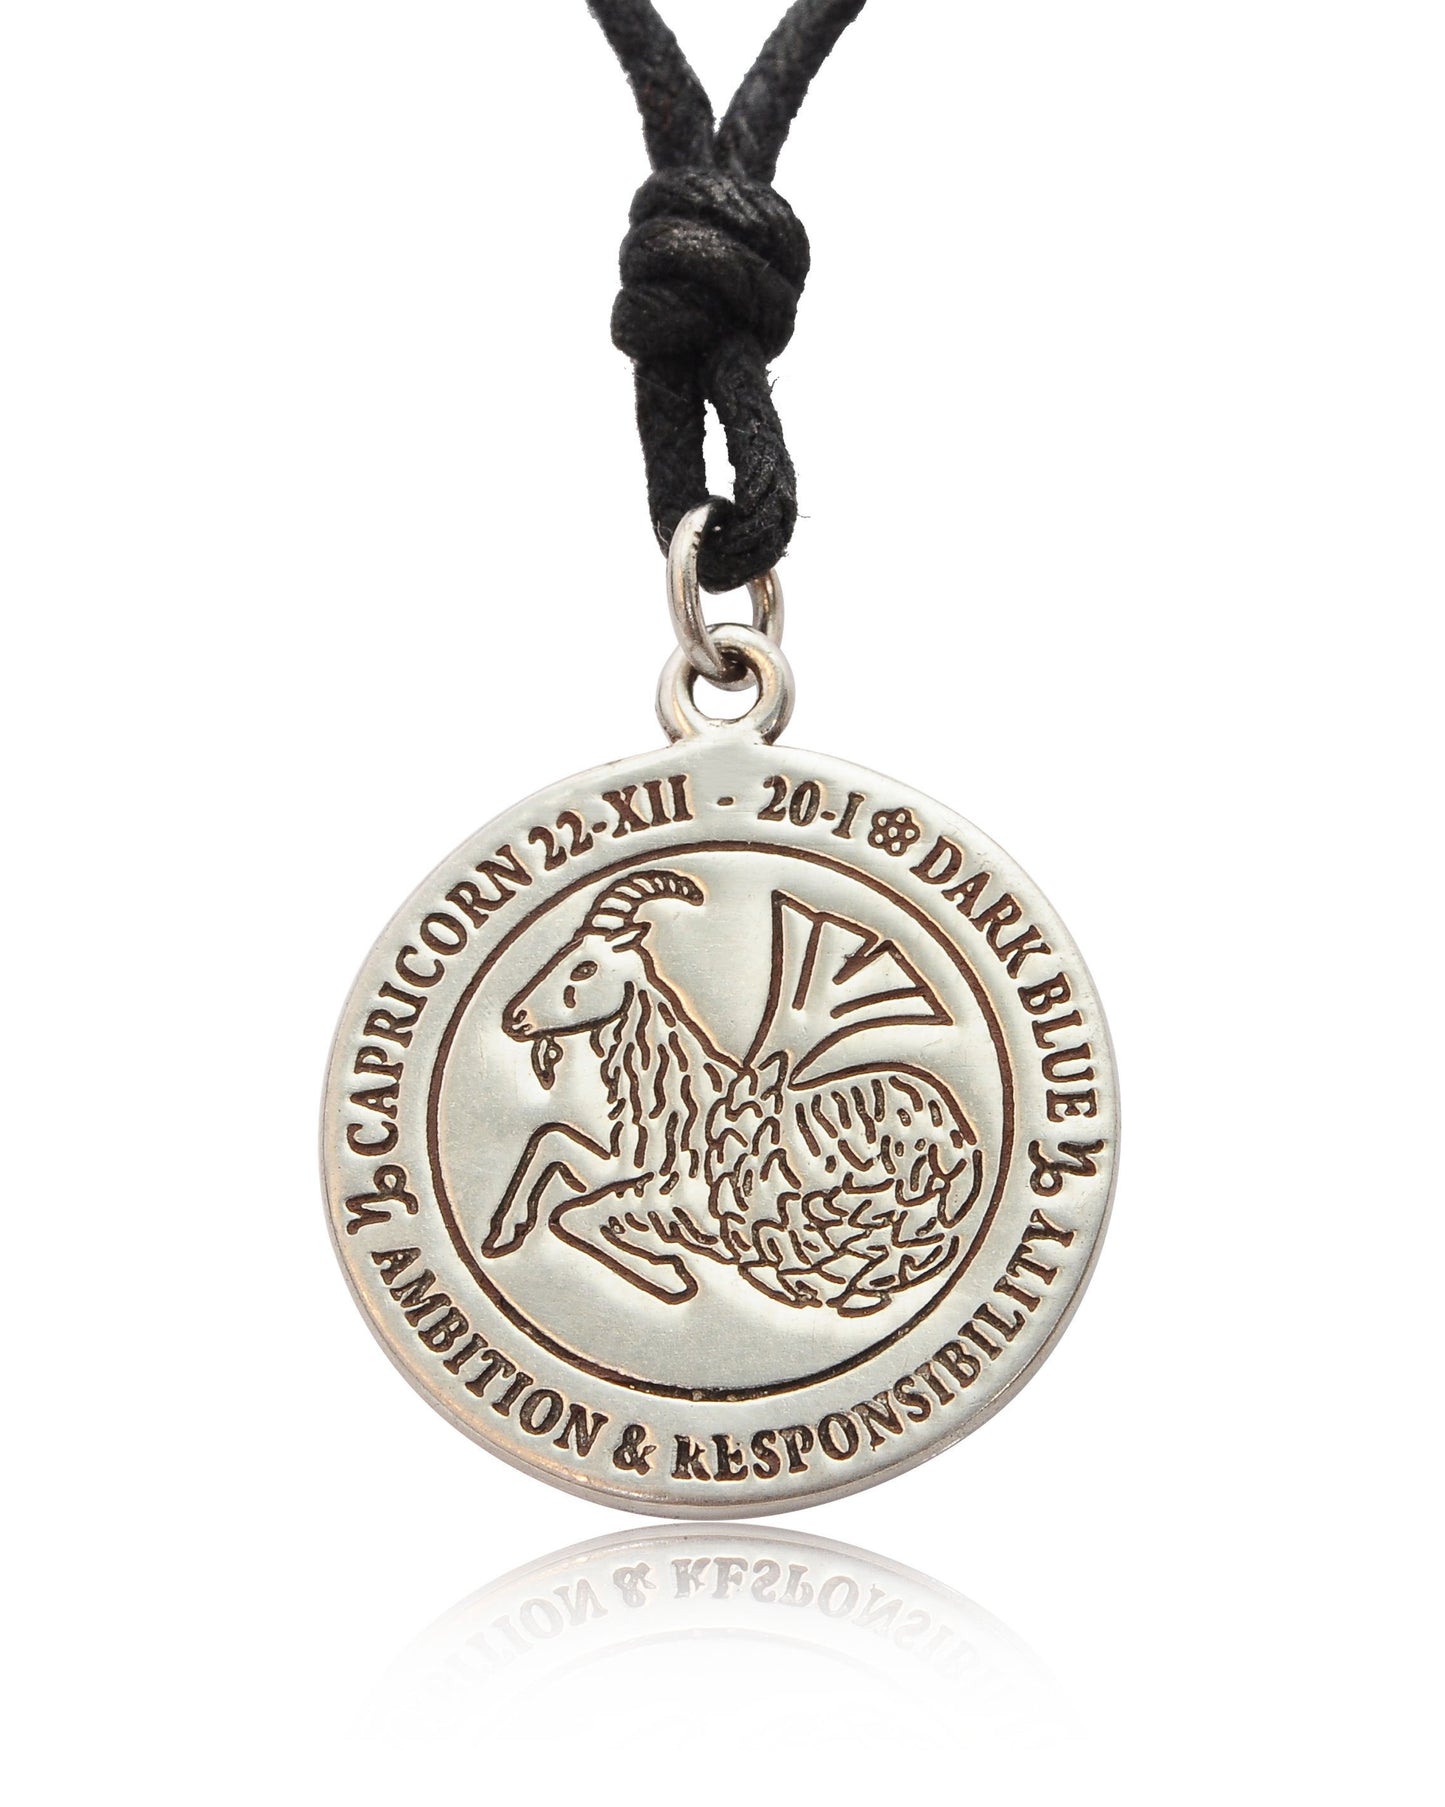 Astrology Horoscope Silver Pewter Charm Necklace Pendant Jewelry